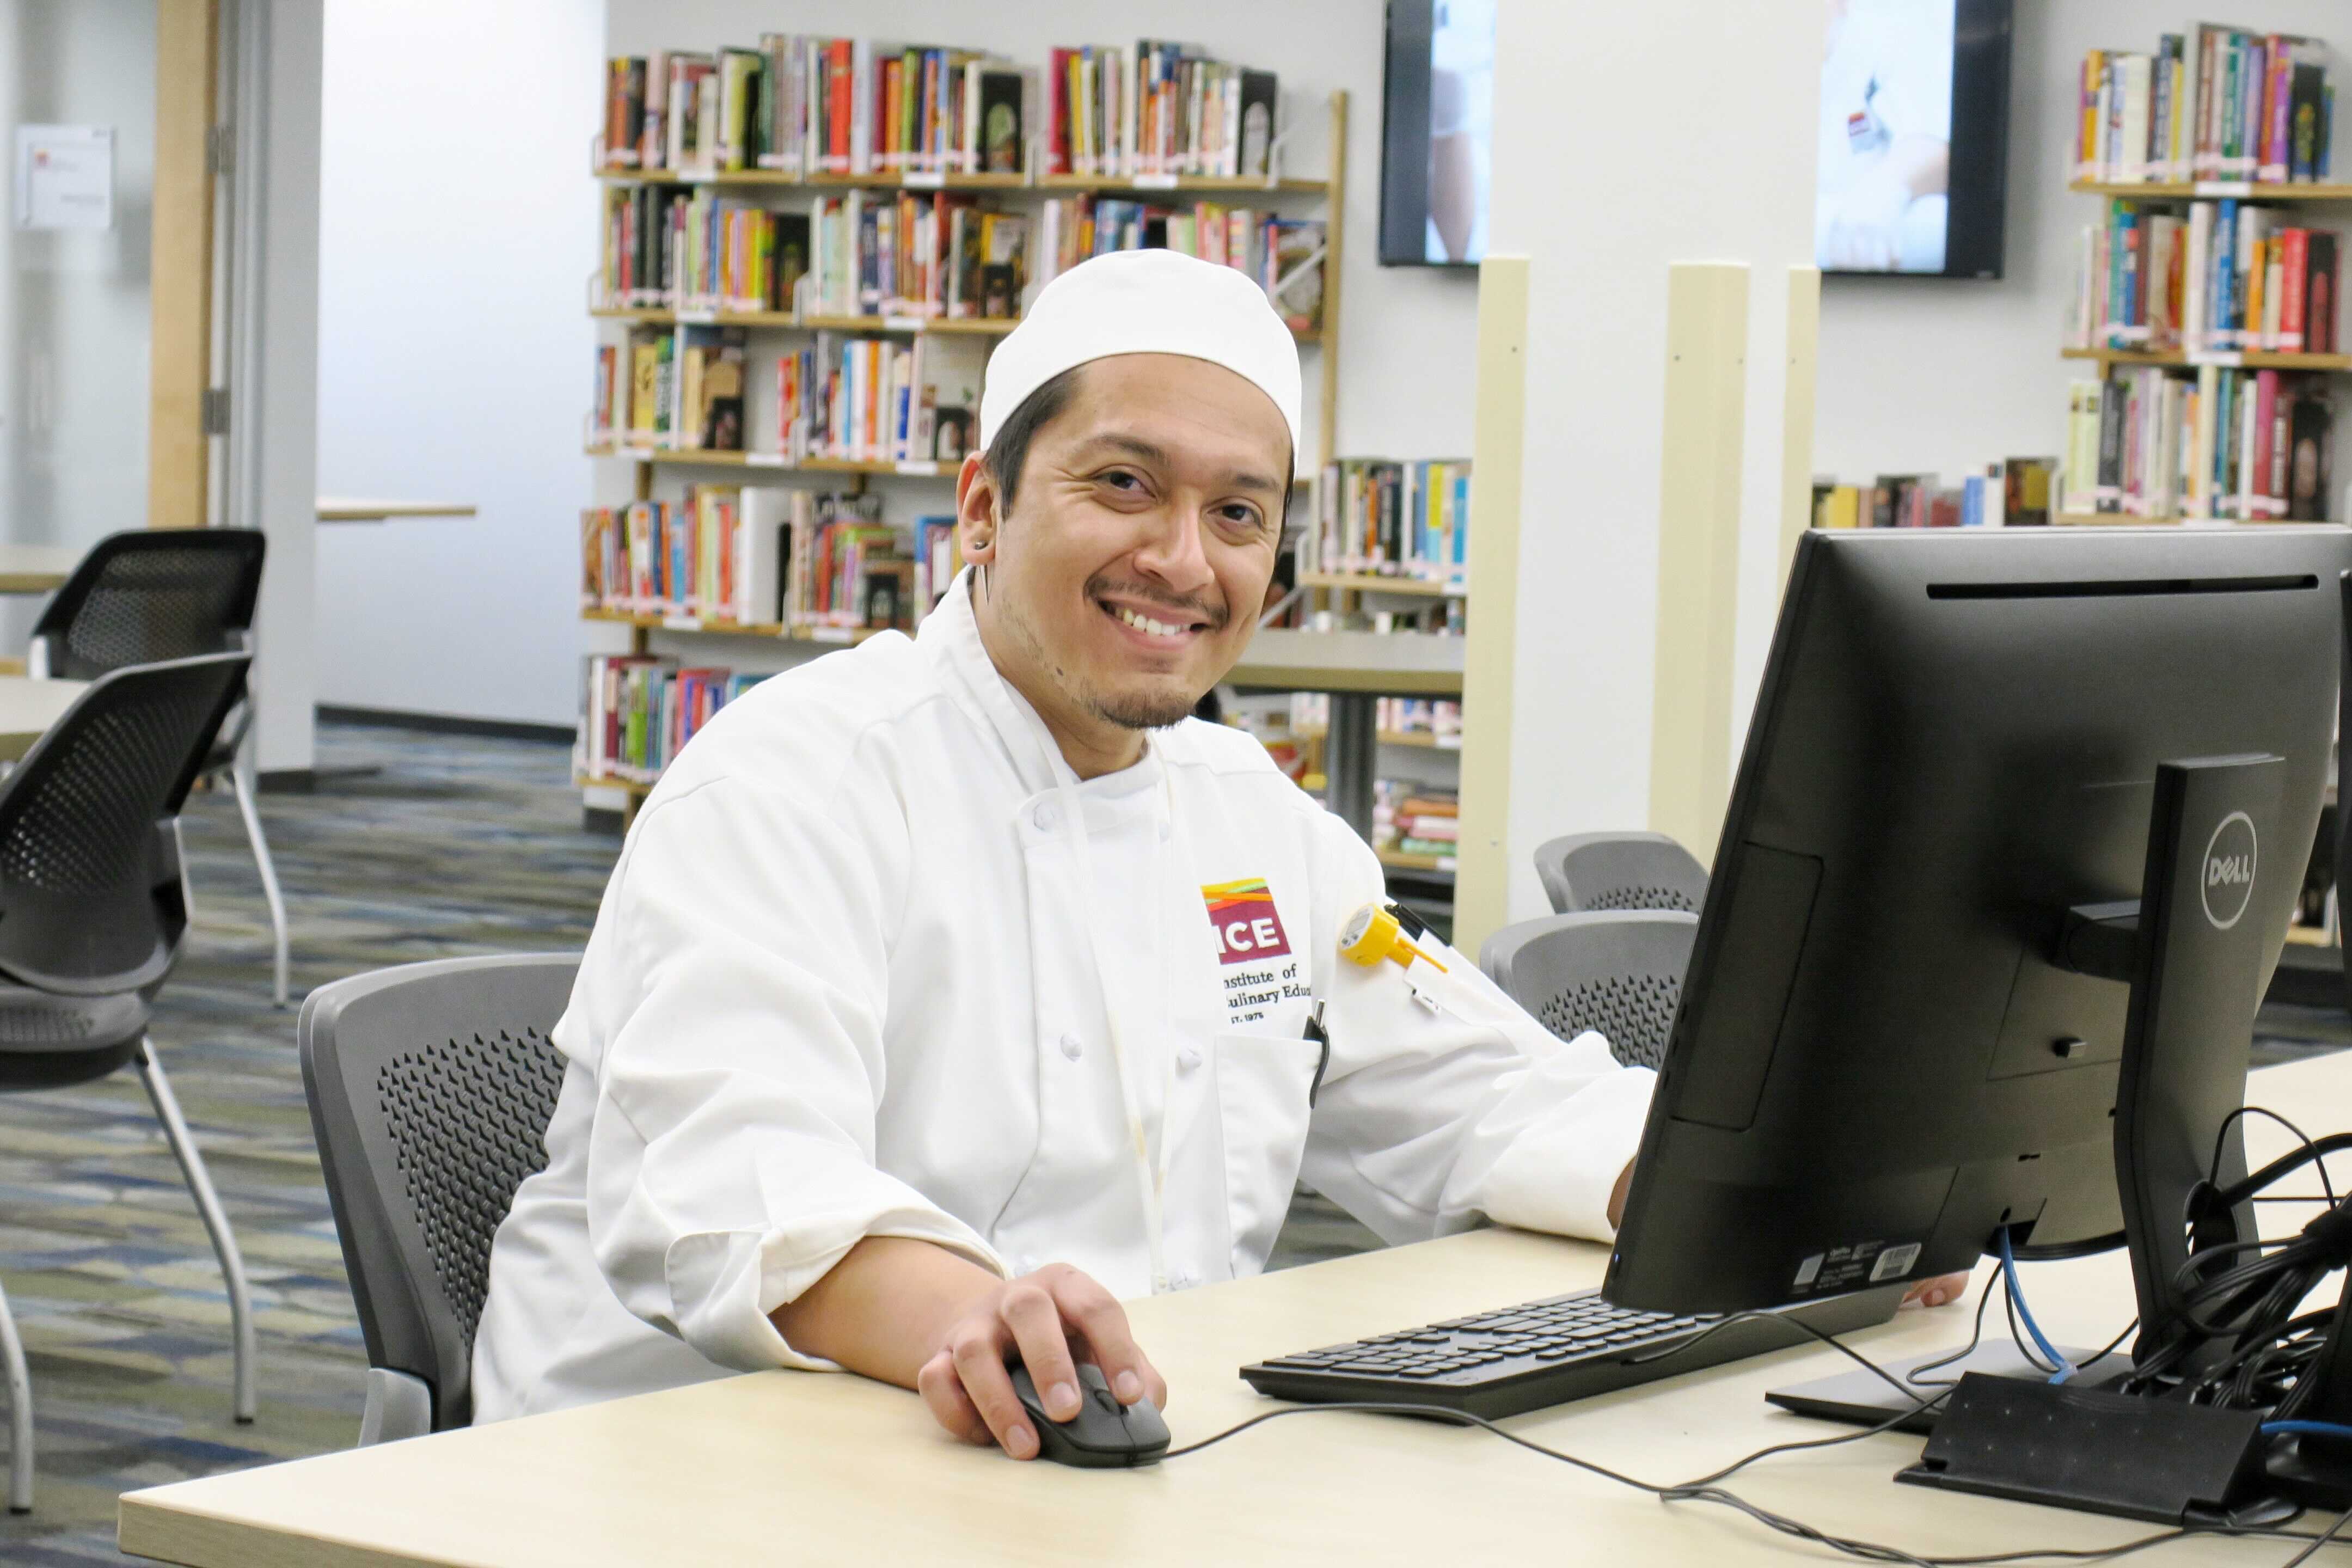 A student studies in the learning resource center at ICE's Los Angeles campus